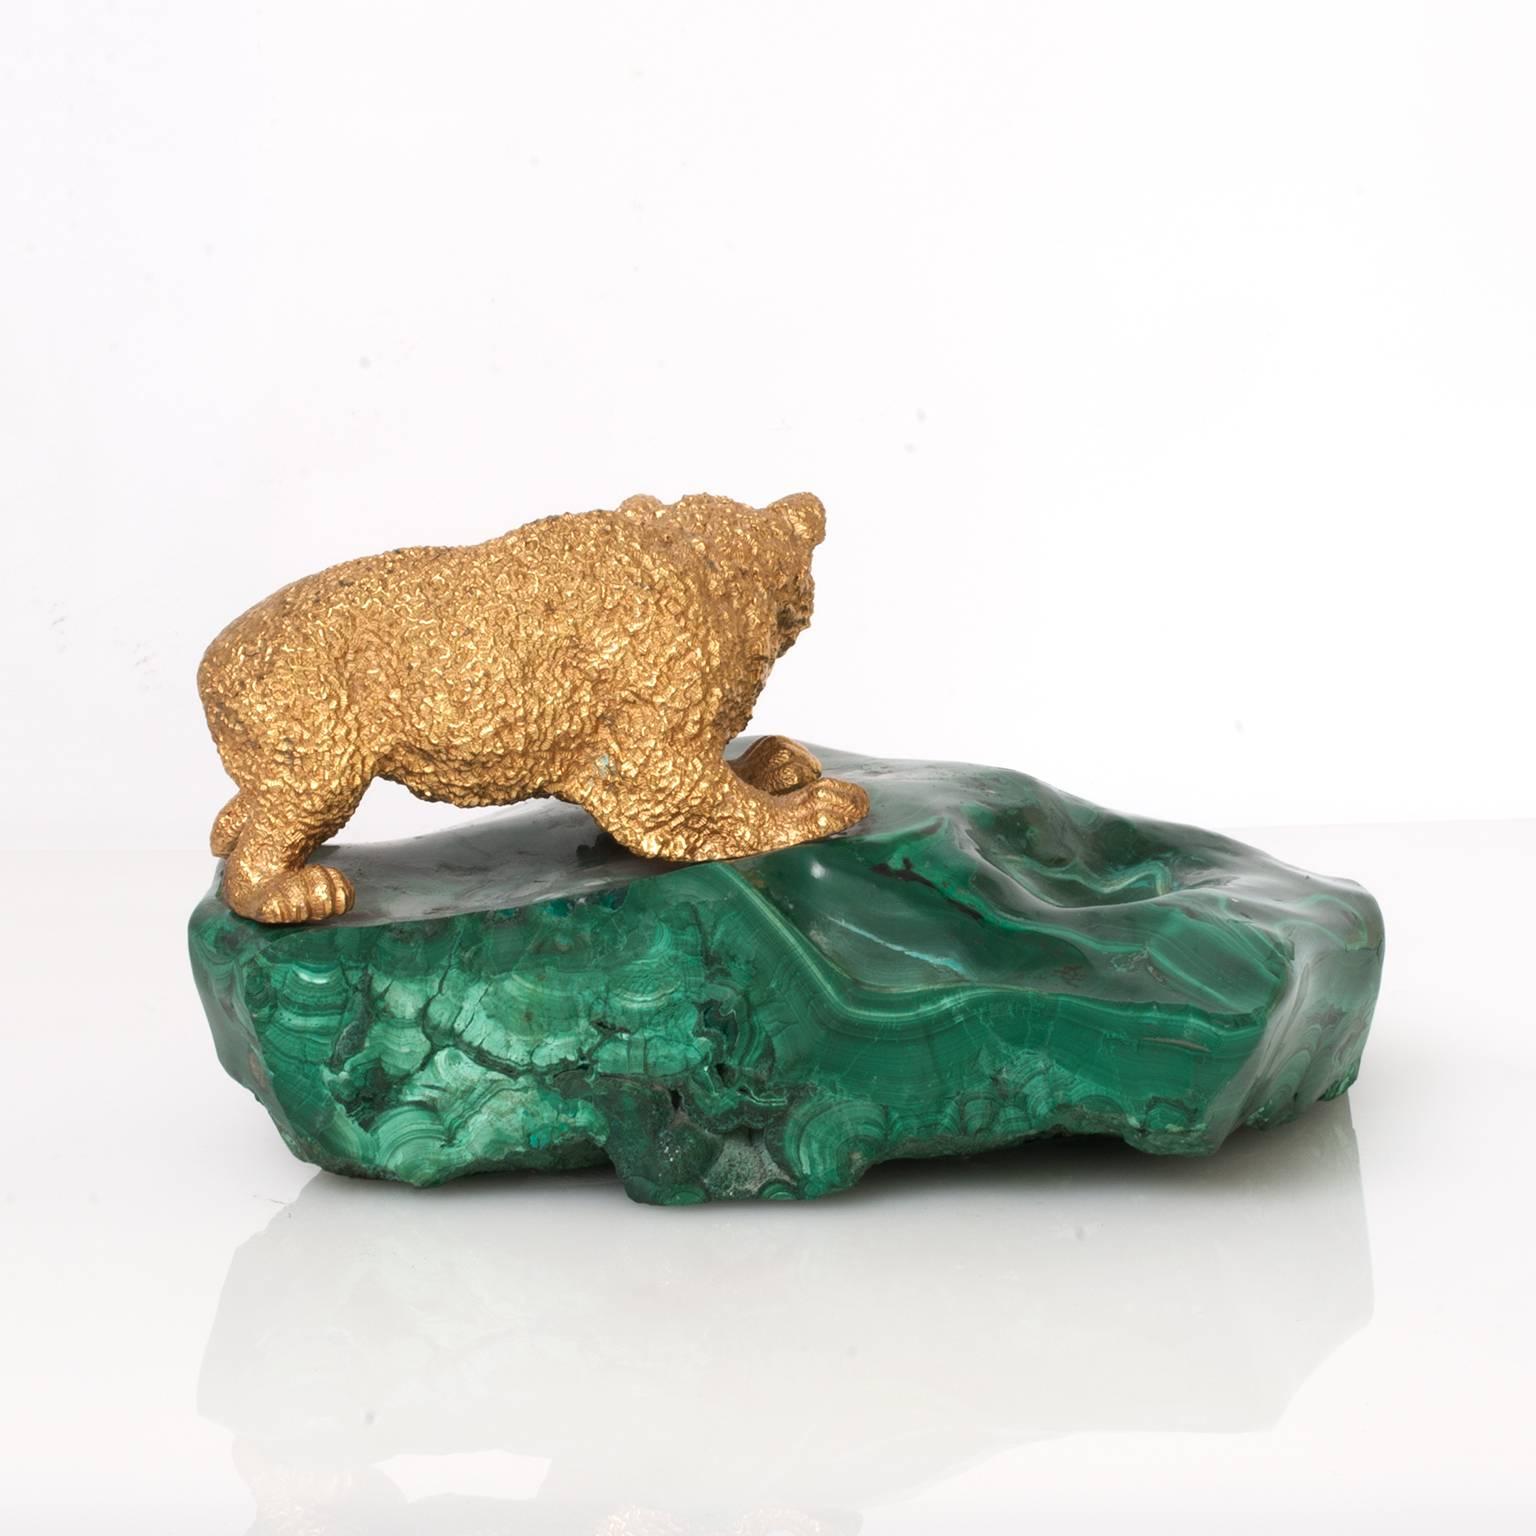 20th Century Russian Gilded Bronze Bear Cub Sculpture on a Sold Piece of Malachite